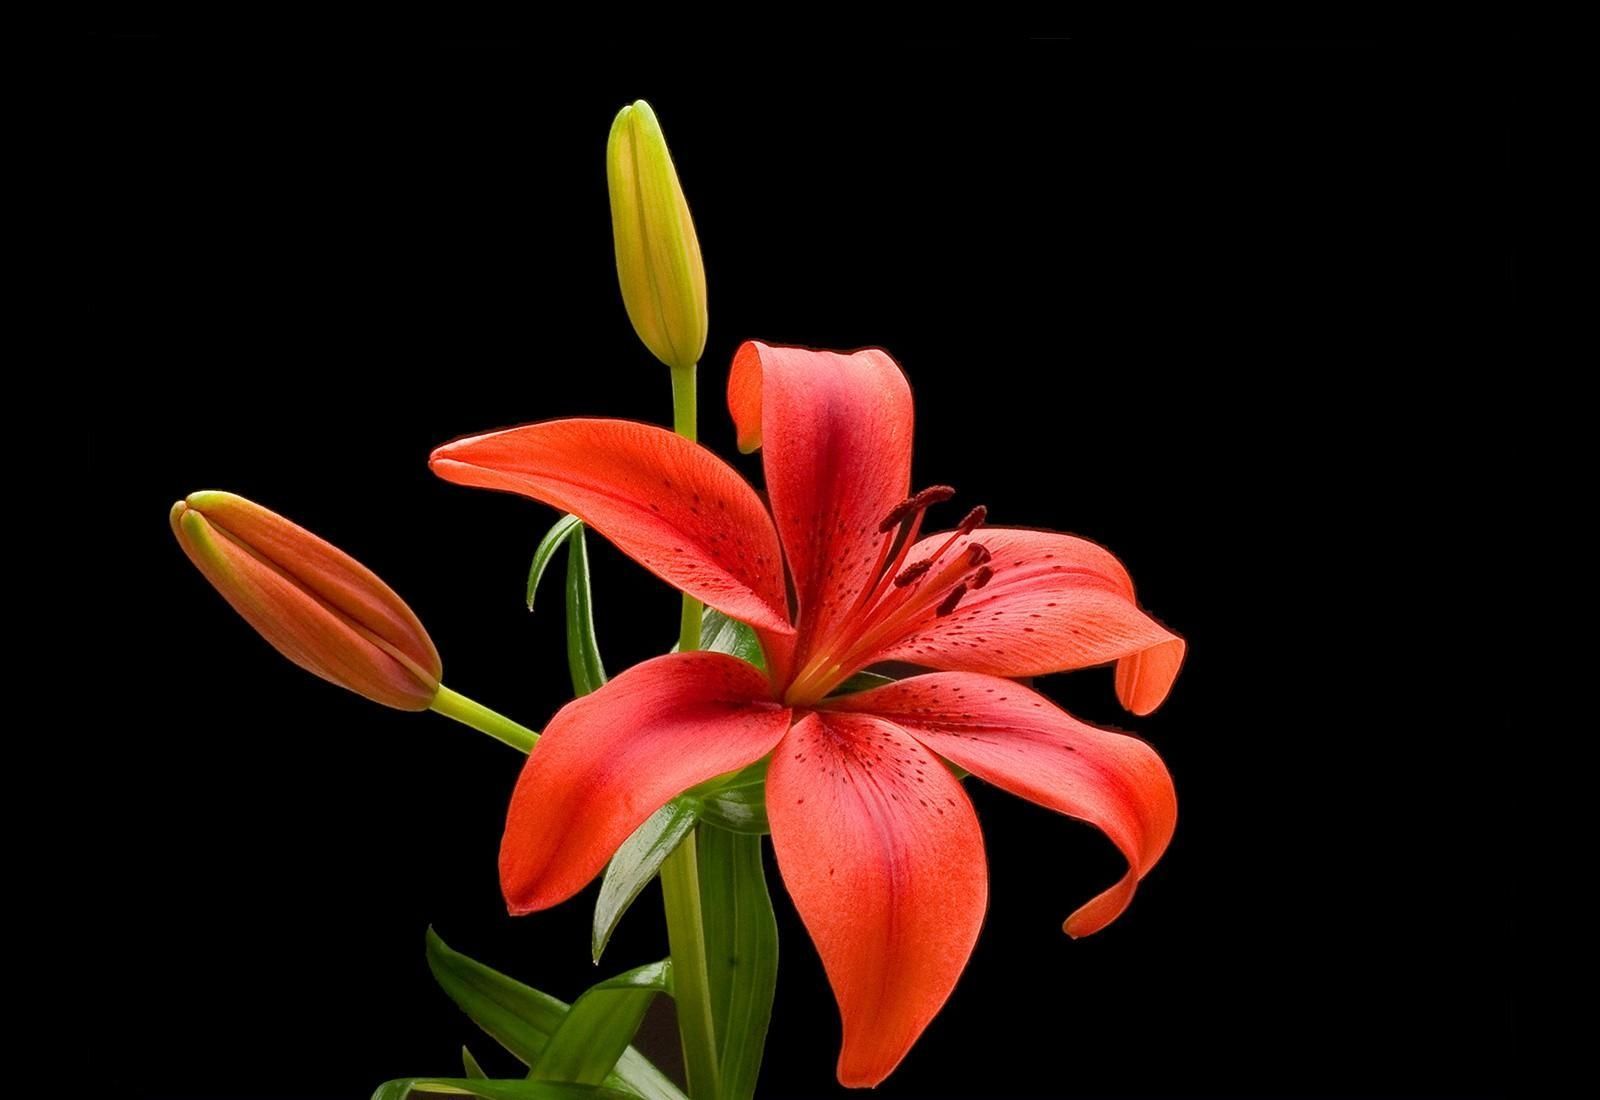 Lily Flower Wallpapers - Wallpaper Cave